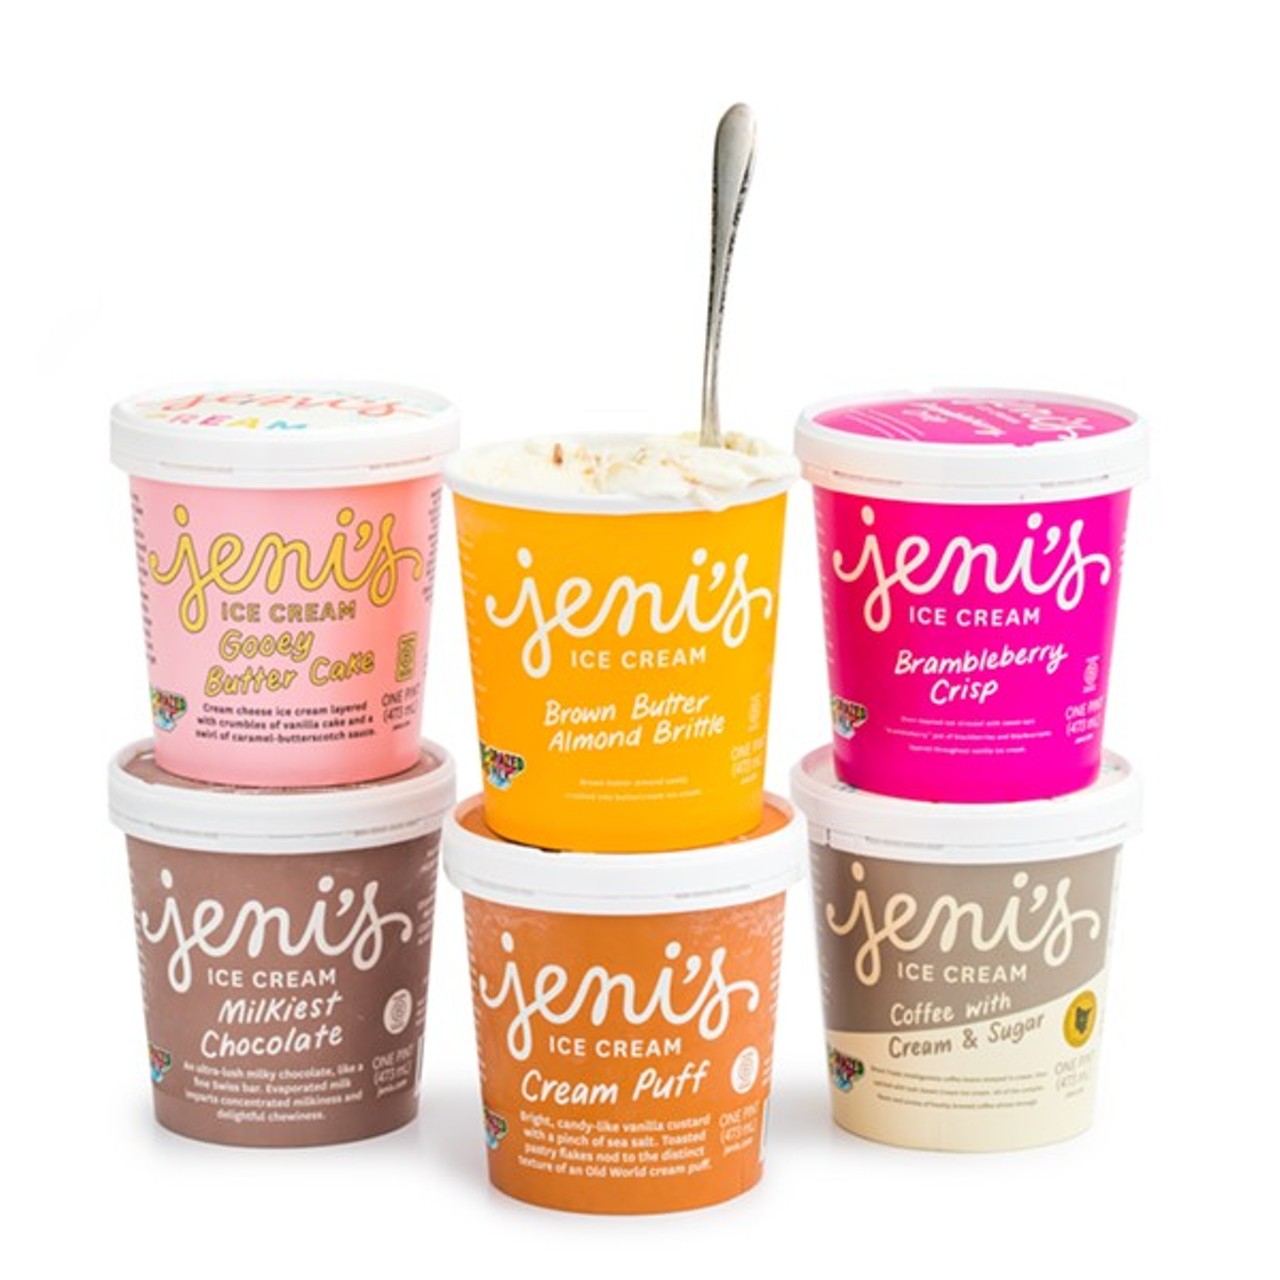 Jeni’s Splendid Ice Cream
67 North Main St., Chagrin Falls
What started off as a one off location in Columbus in 2002 has turned into a nationwide craze sweeping the nation. Chagrin Falls got a location in 2010, the first one outside of the Columbus area. Now, there are 66 locations in 14 states and Washington D.C., plus distribution of the gourmet ice cream in over 3,000 high-end grocery stores.